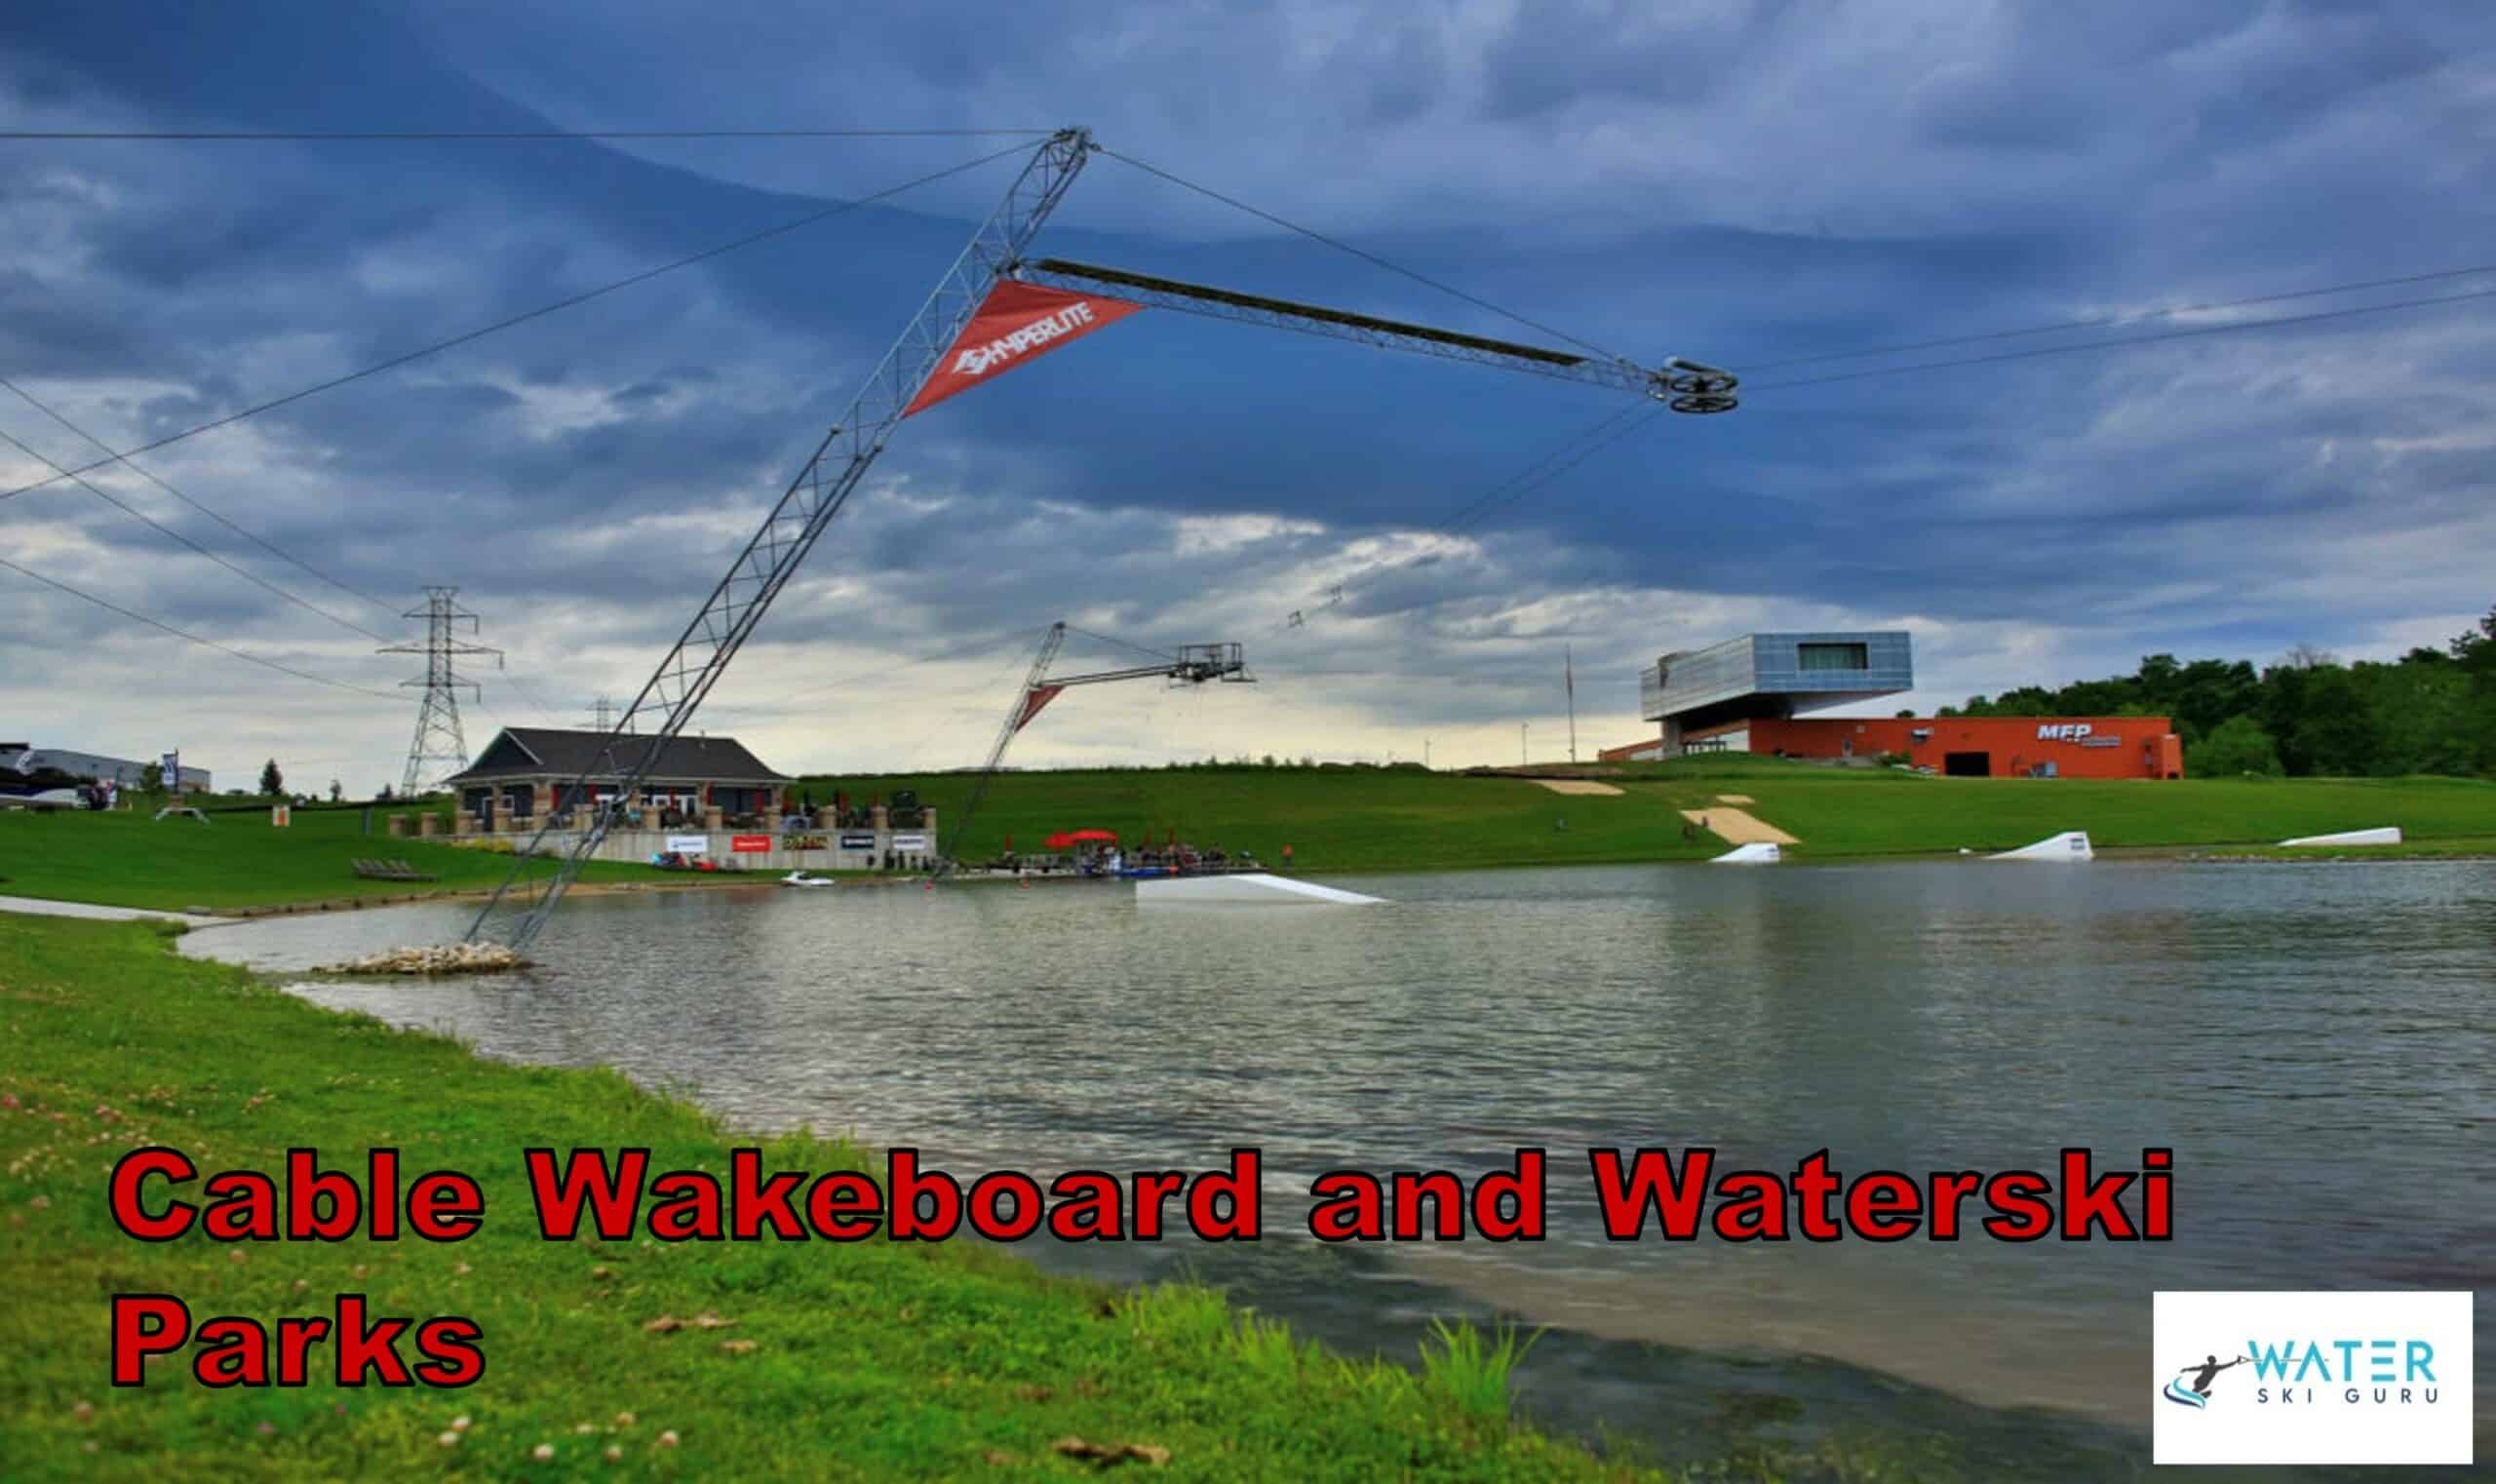 Cable Wakeboard and Waterski Parks